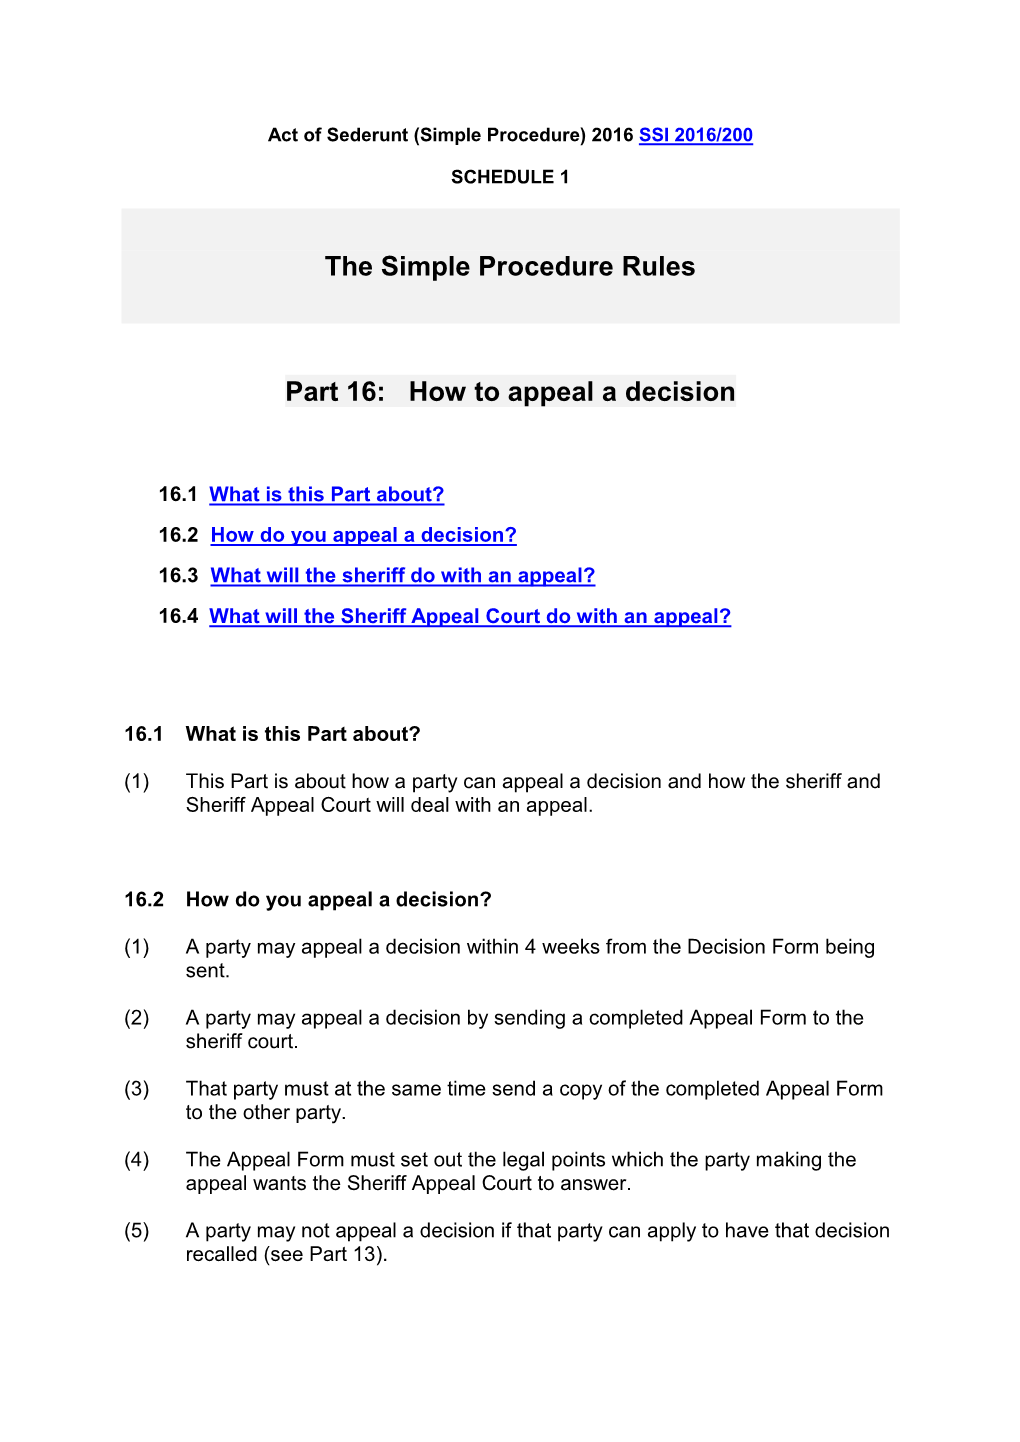 Part 16: How to Appeal a Decision